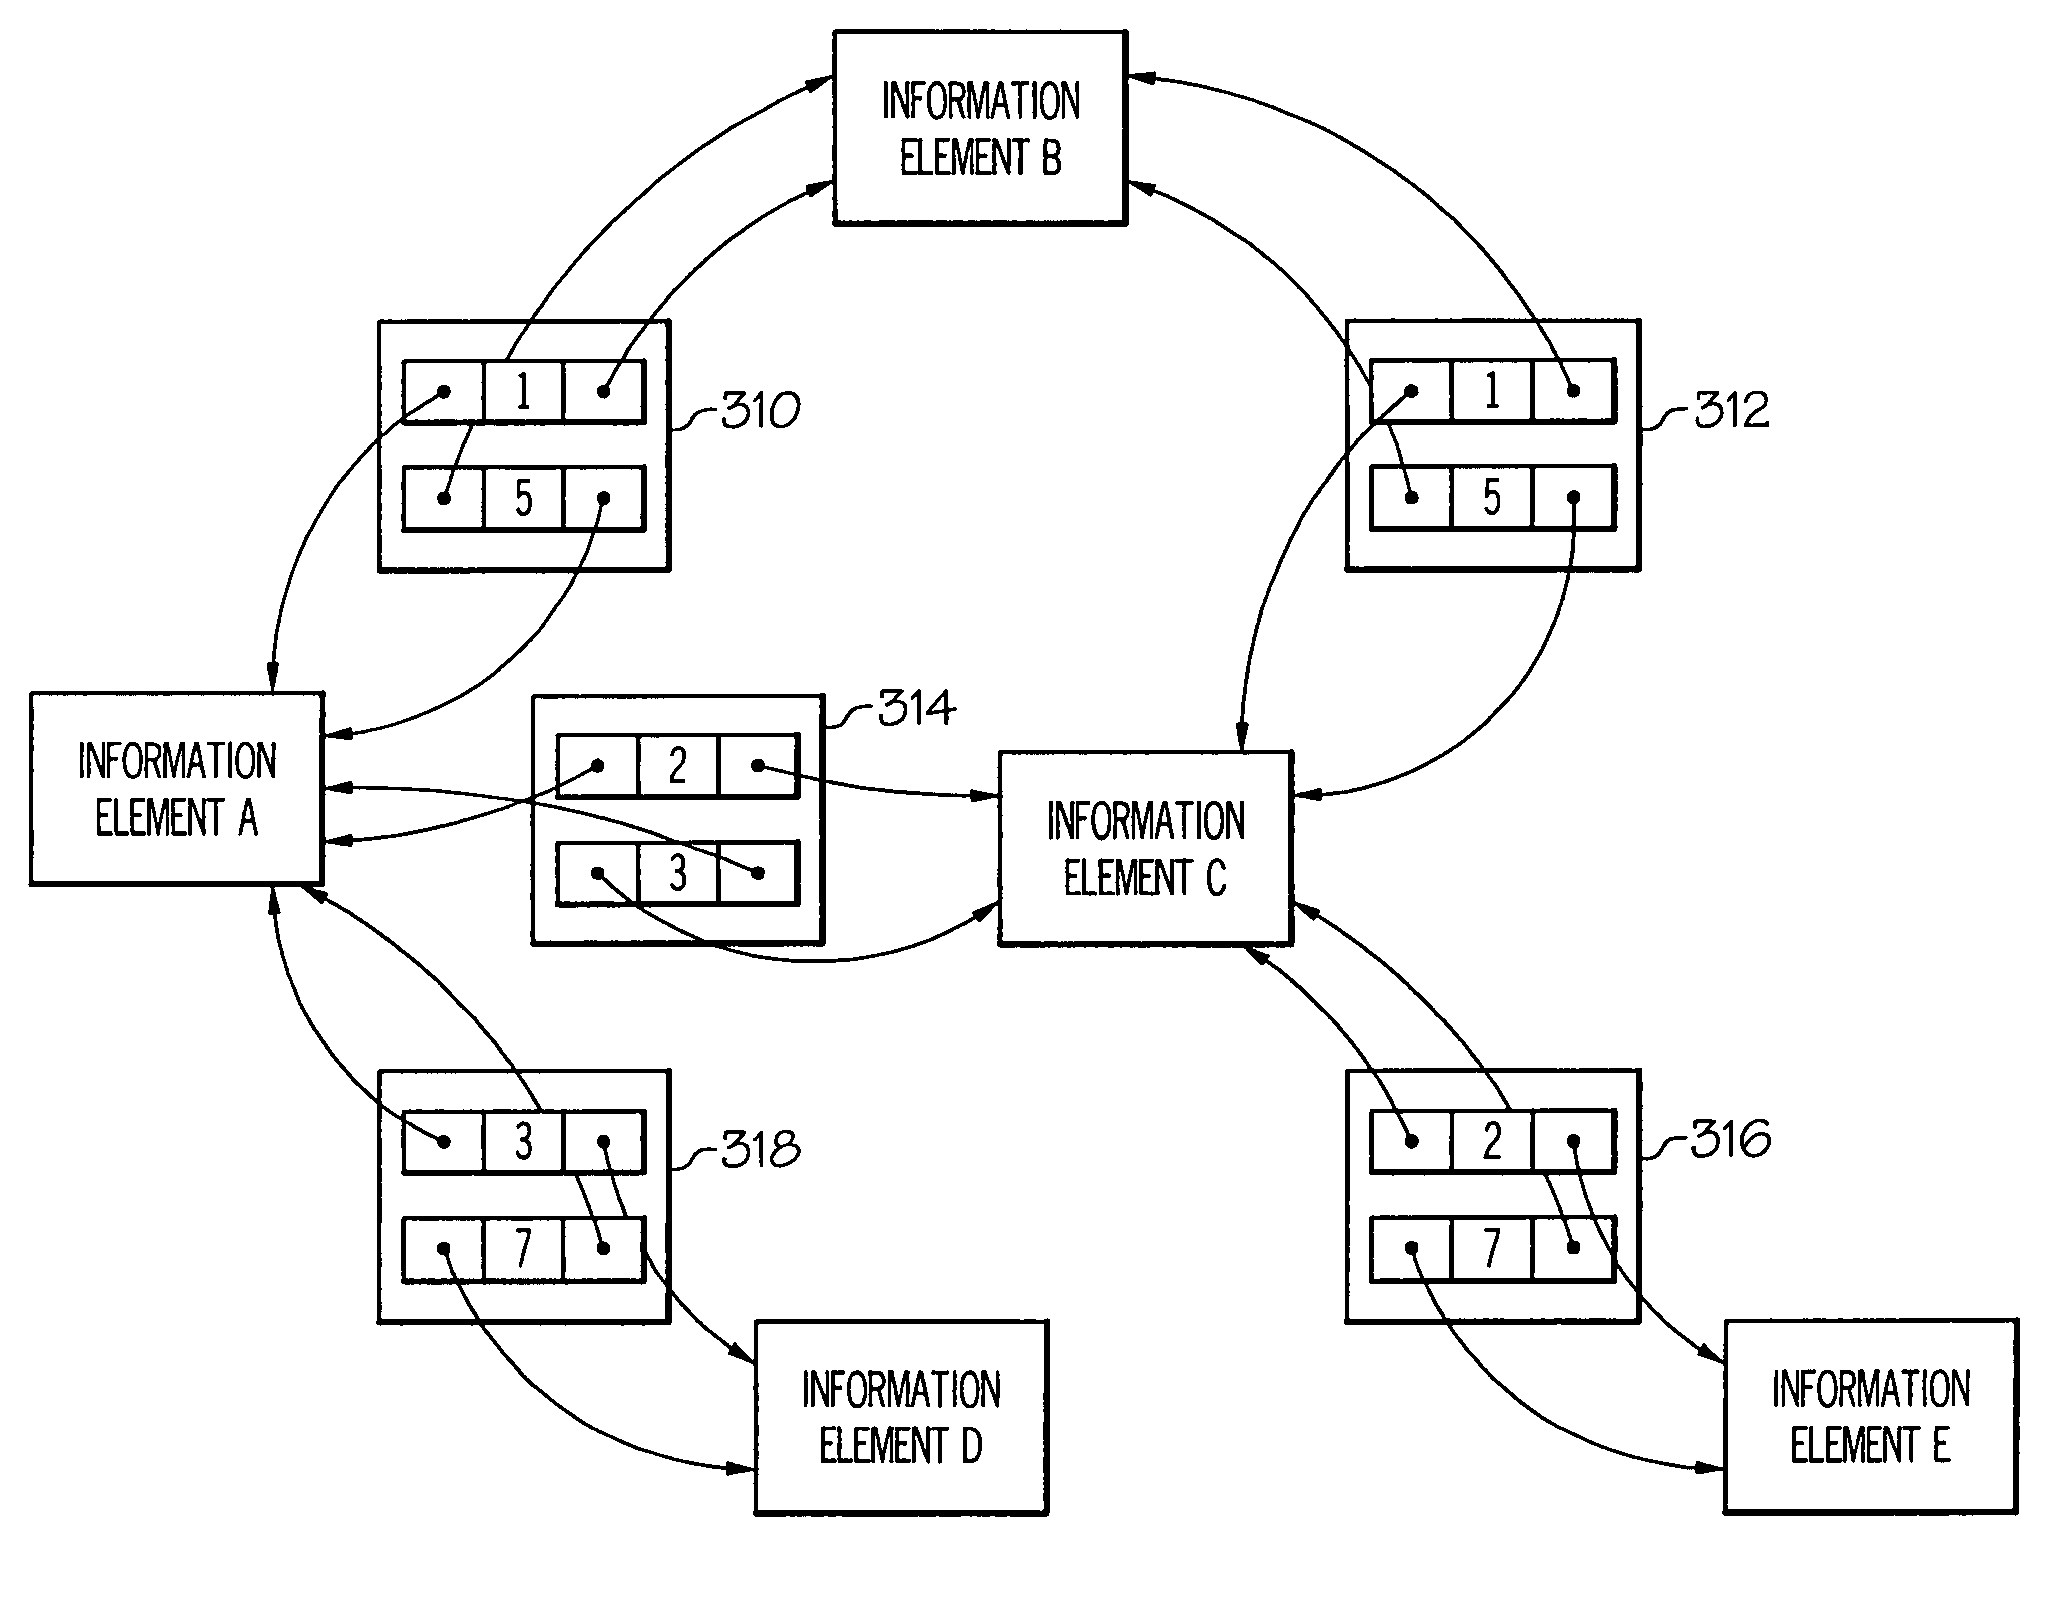 System and method of unstructured analysis through the application of multiple structure maps